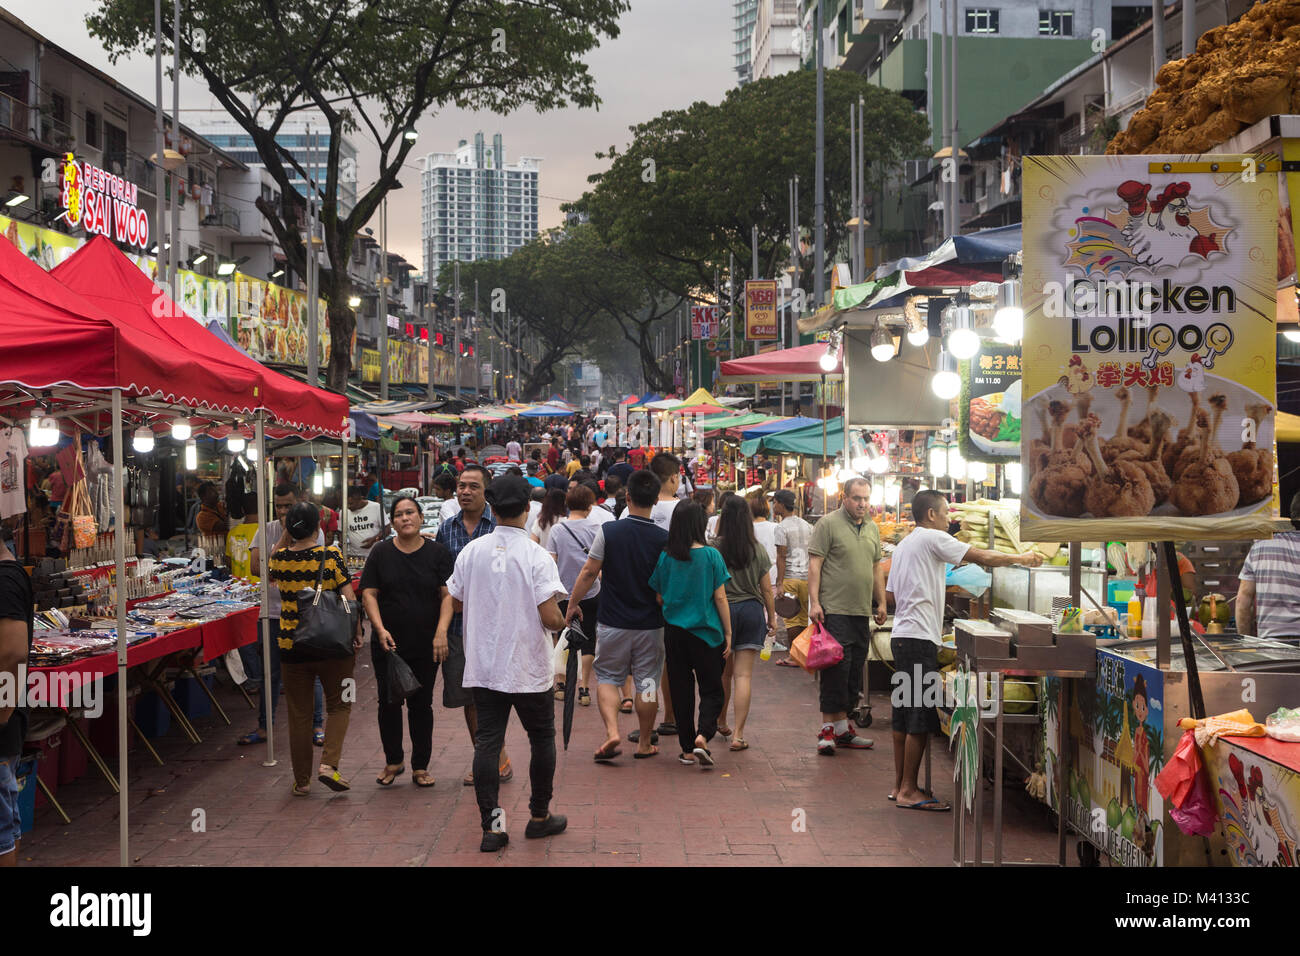 Kuala Lumpur, Malaysia - December 22 2017: Tourists and locals wander along Jalan Alor famous for its chinese food restaurant and street food stalls n Stock Photo